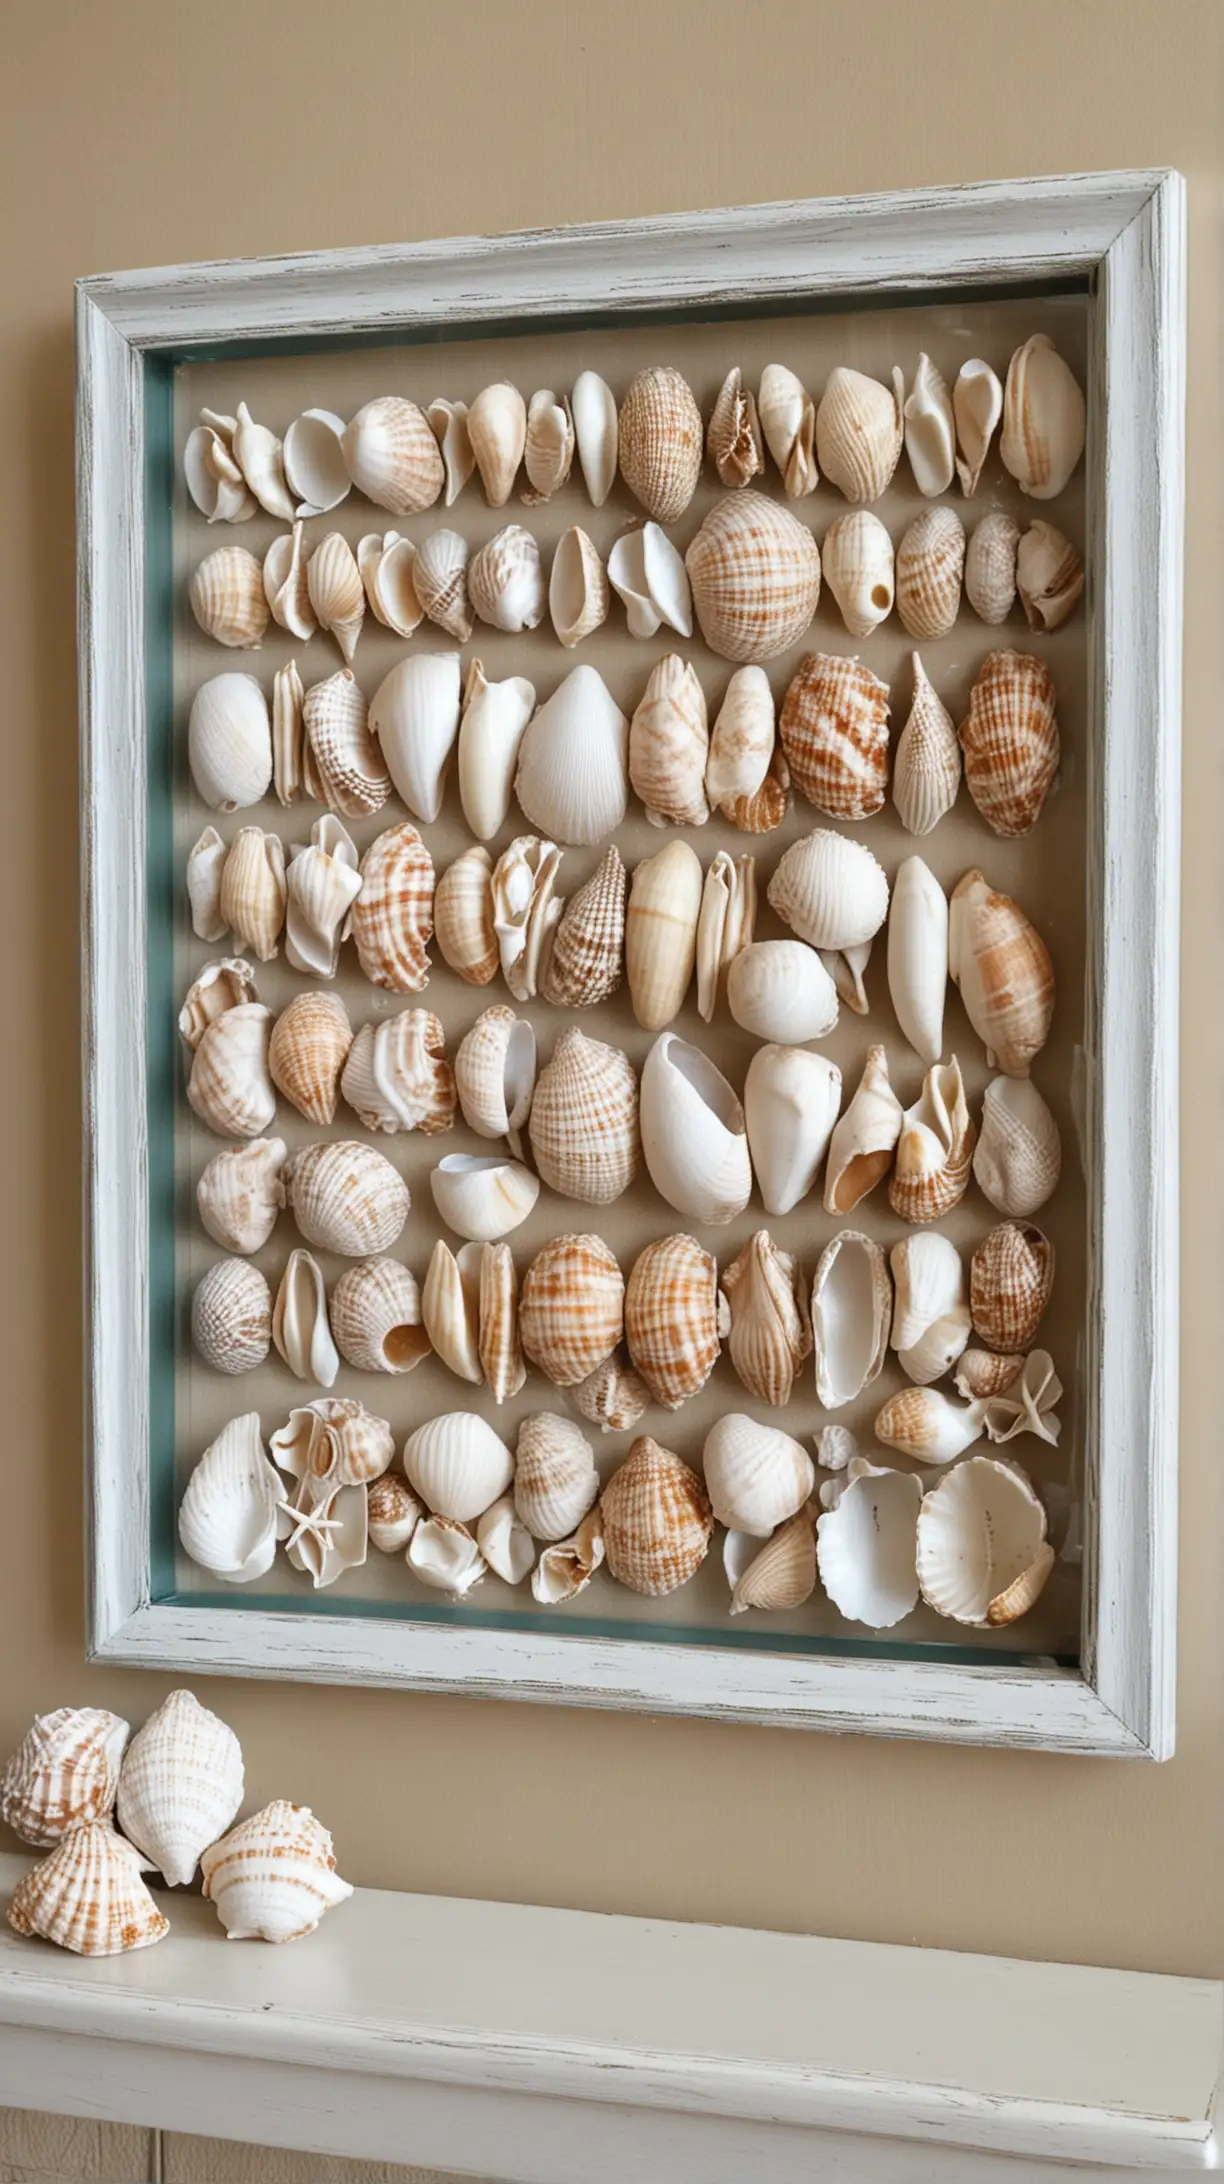 create me the image of Coastal Chic living room idea. Make sure to add the sitting or sofa in the frame. Furthermore everything in the idea should be in the frame of image like. Here's the design you have to create for me [Shell Collection Displays

If you’re a beachcomber like me, displaying a collection of shells you’ve found can be a personal and decorative touch. Arrange them in glass jars or create a shadow box for wall art that’s both meaningful and beautiful.]